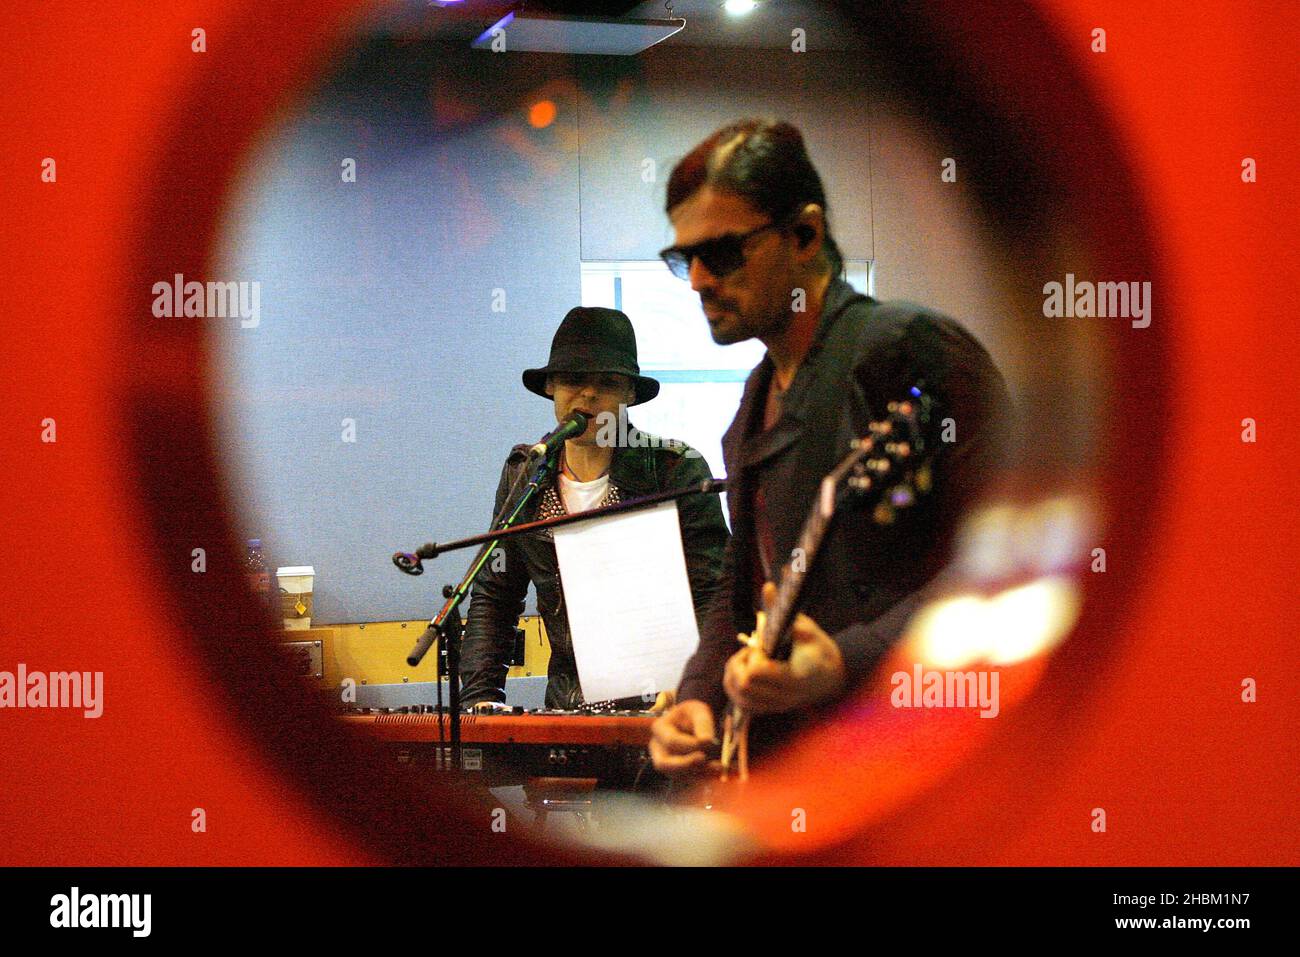 Jared Leto and his band 30 Seconds to Mars perform at XFM on March 29, 2010. Stock Photo